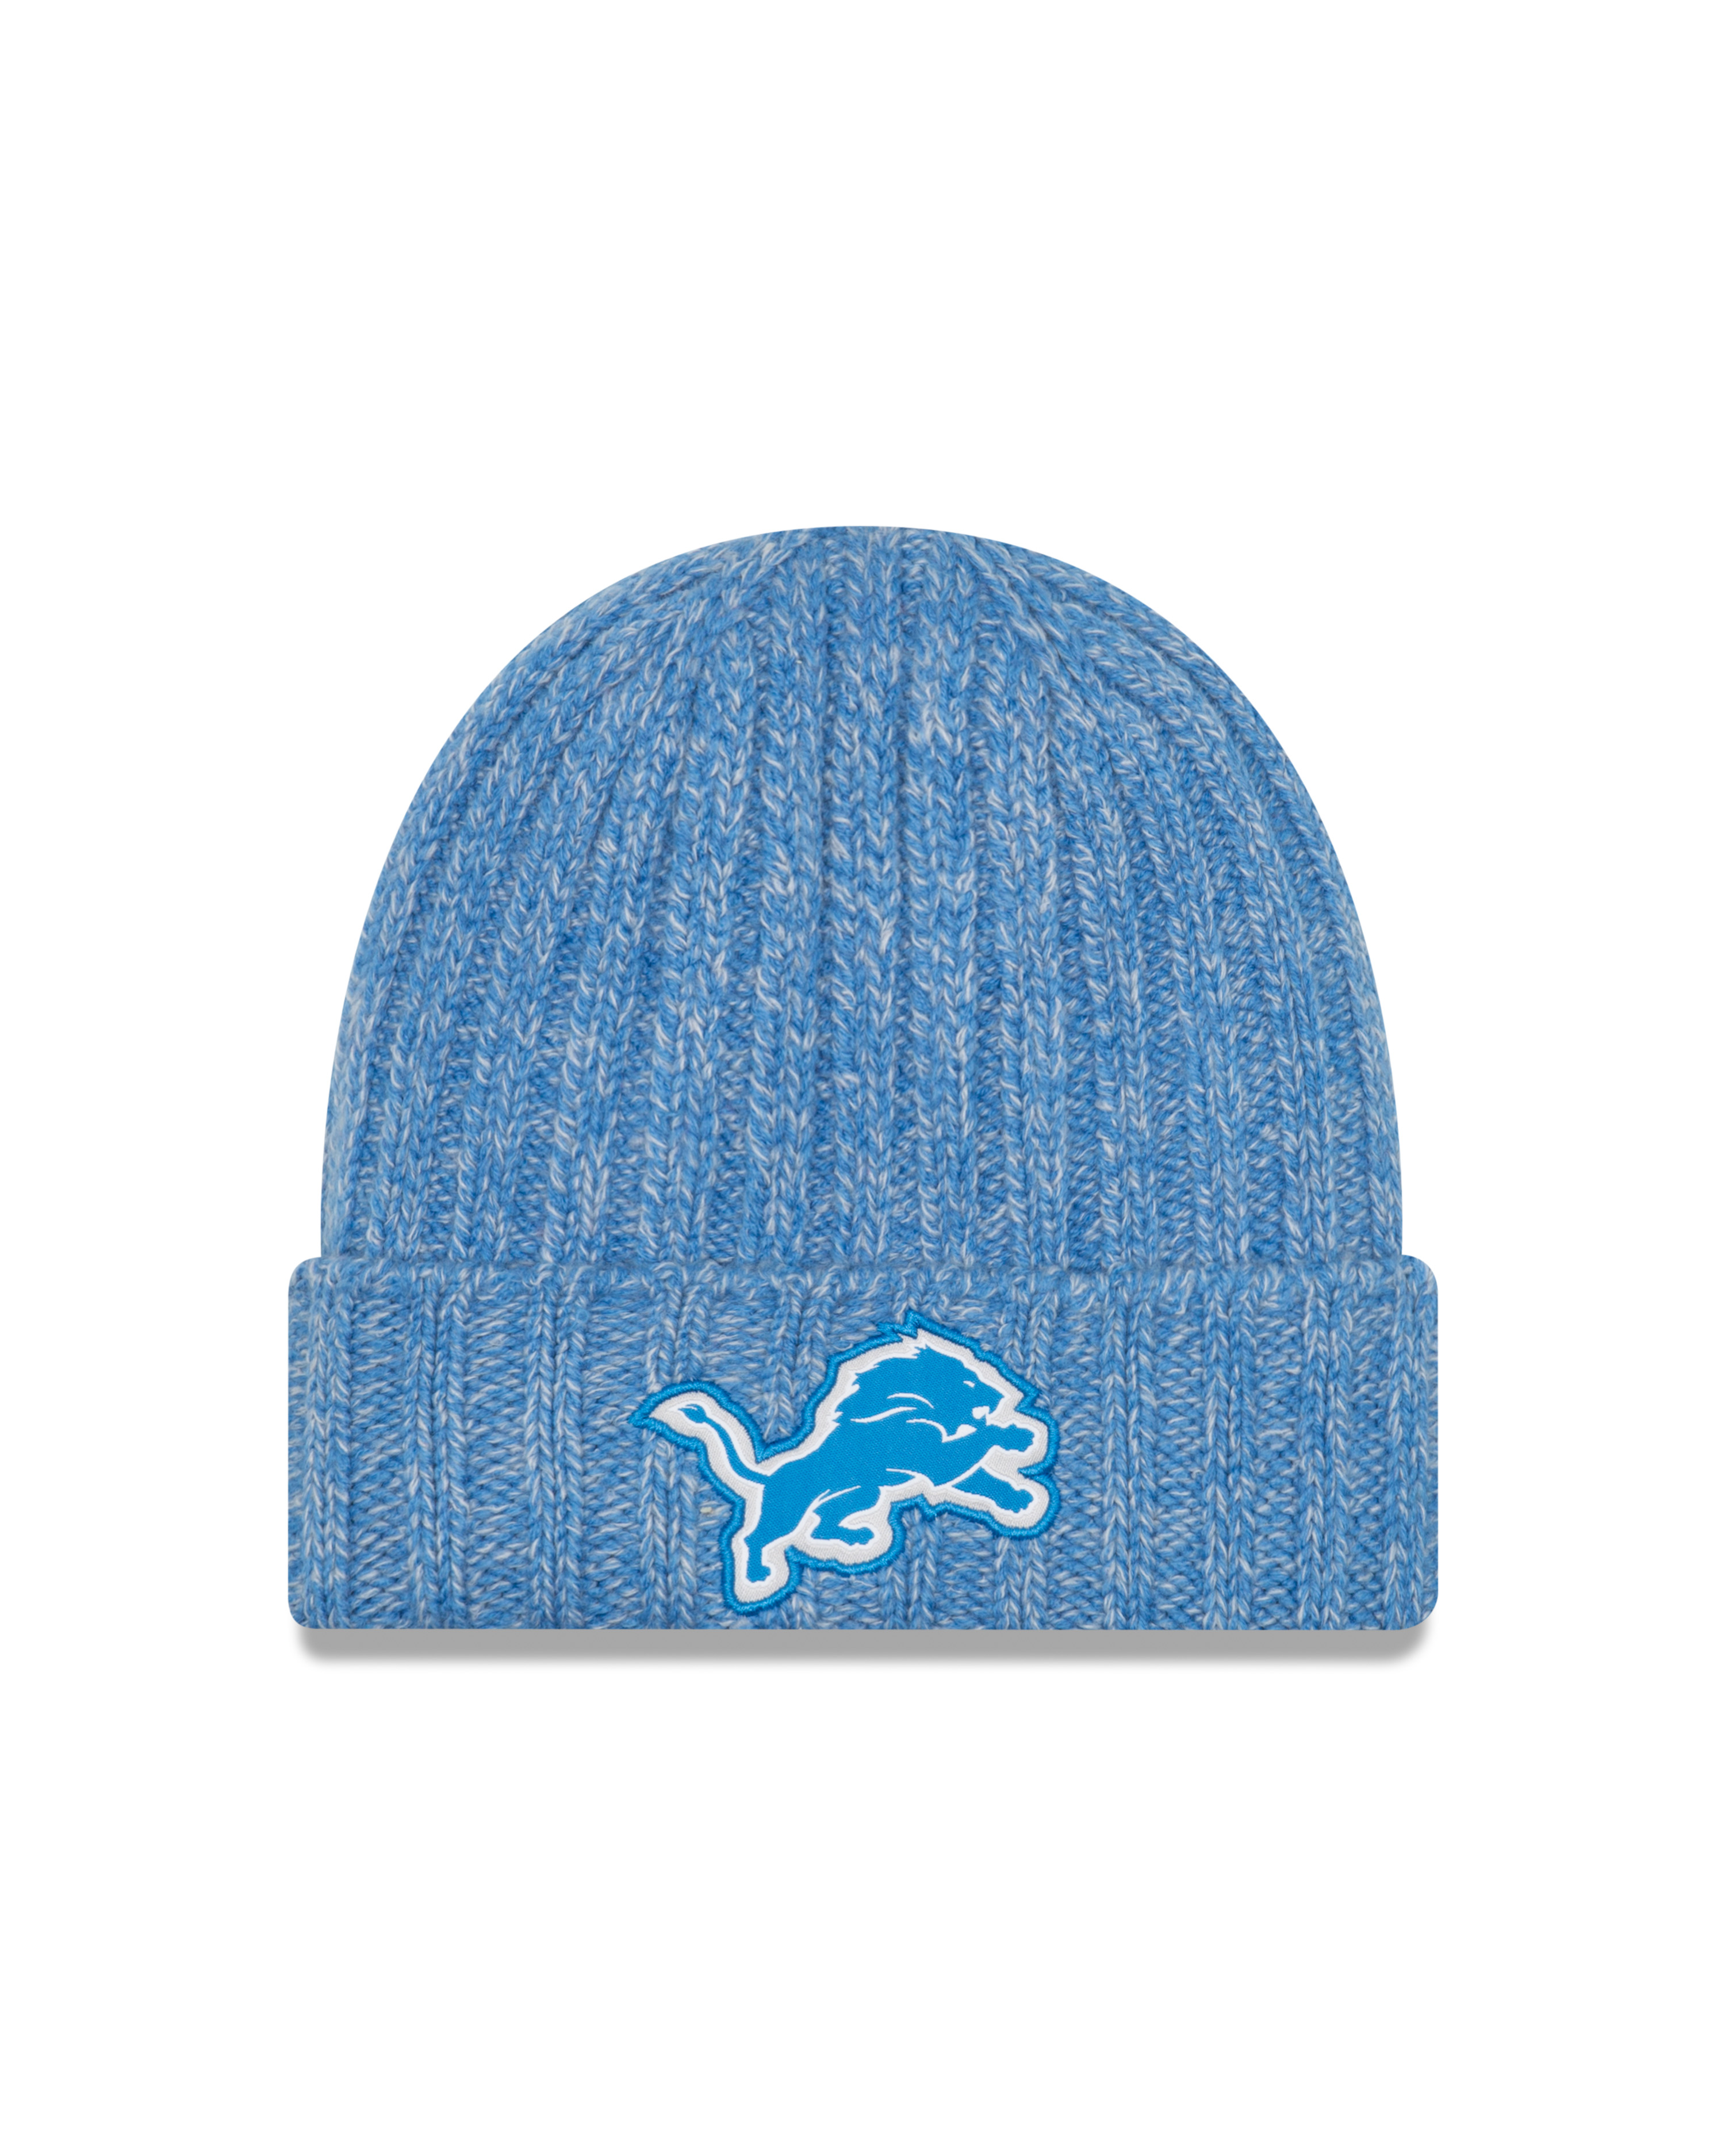 New Era Official NFL Cold Weather Collection #85